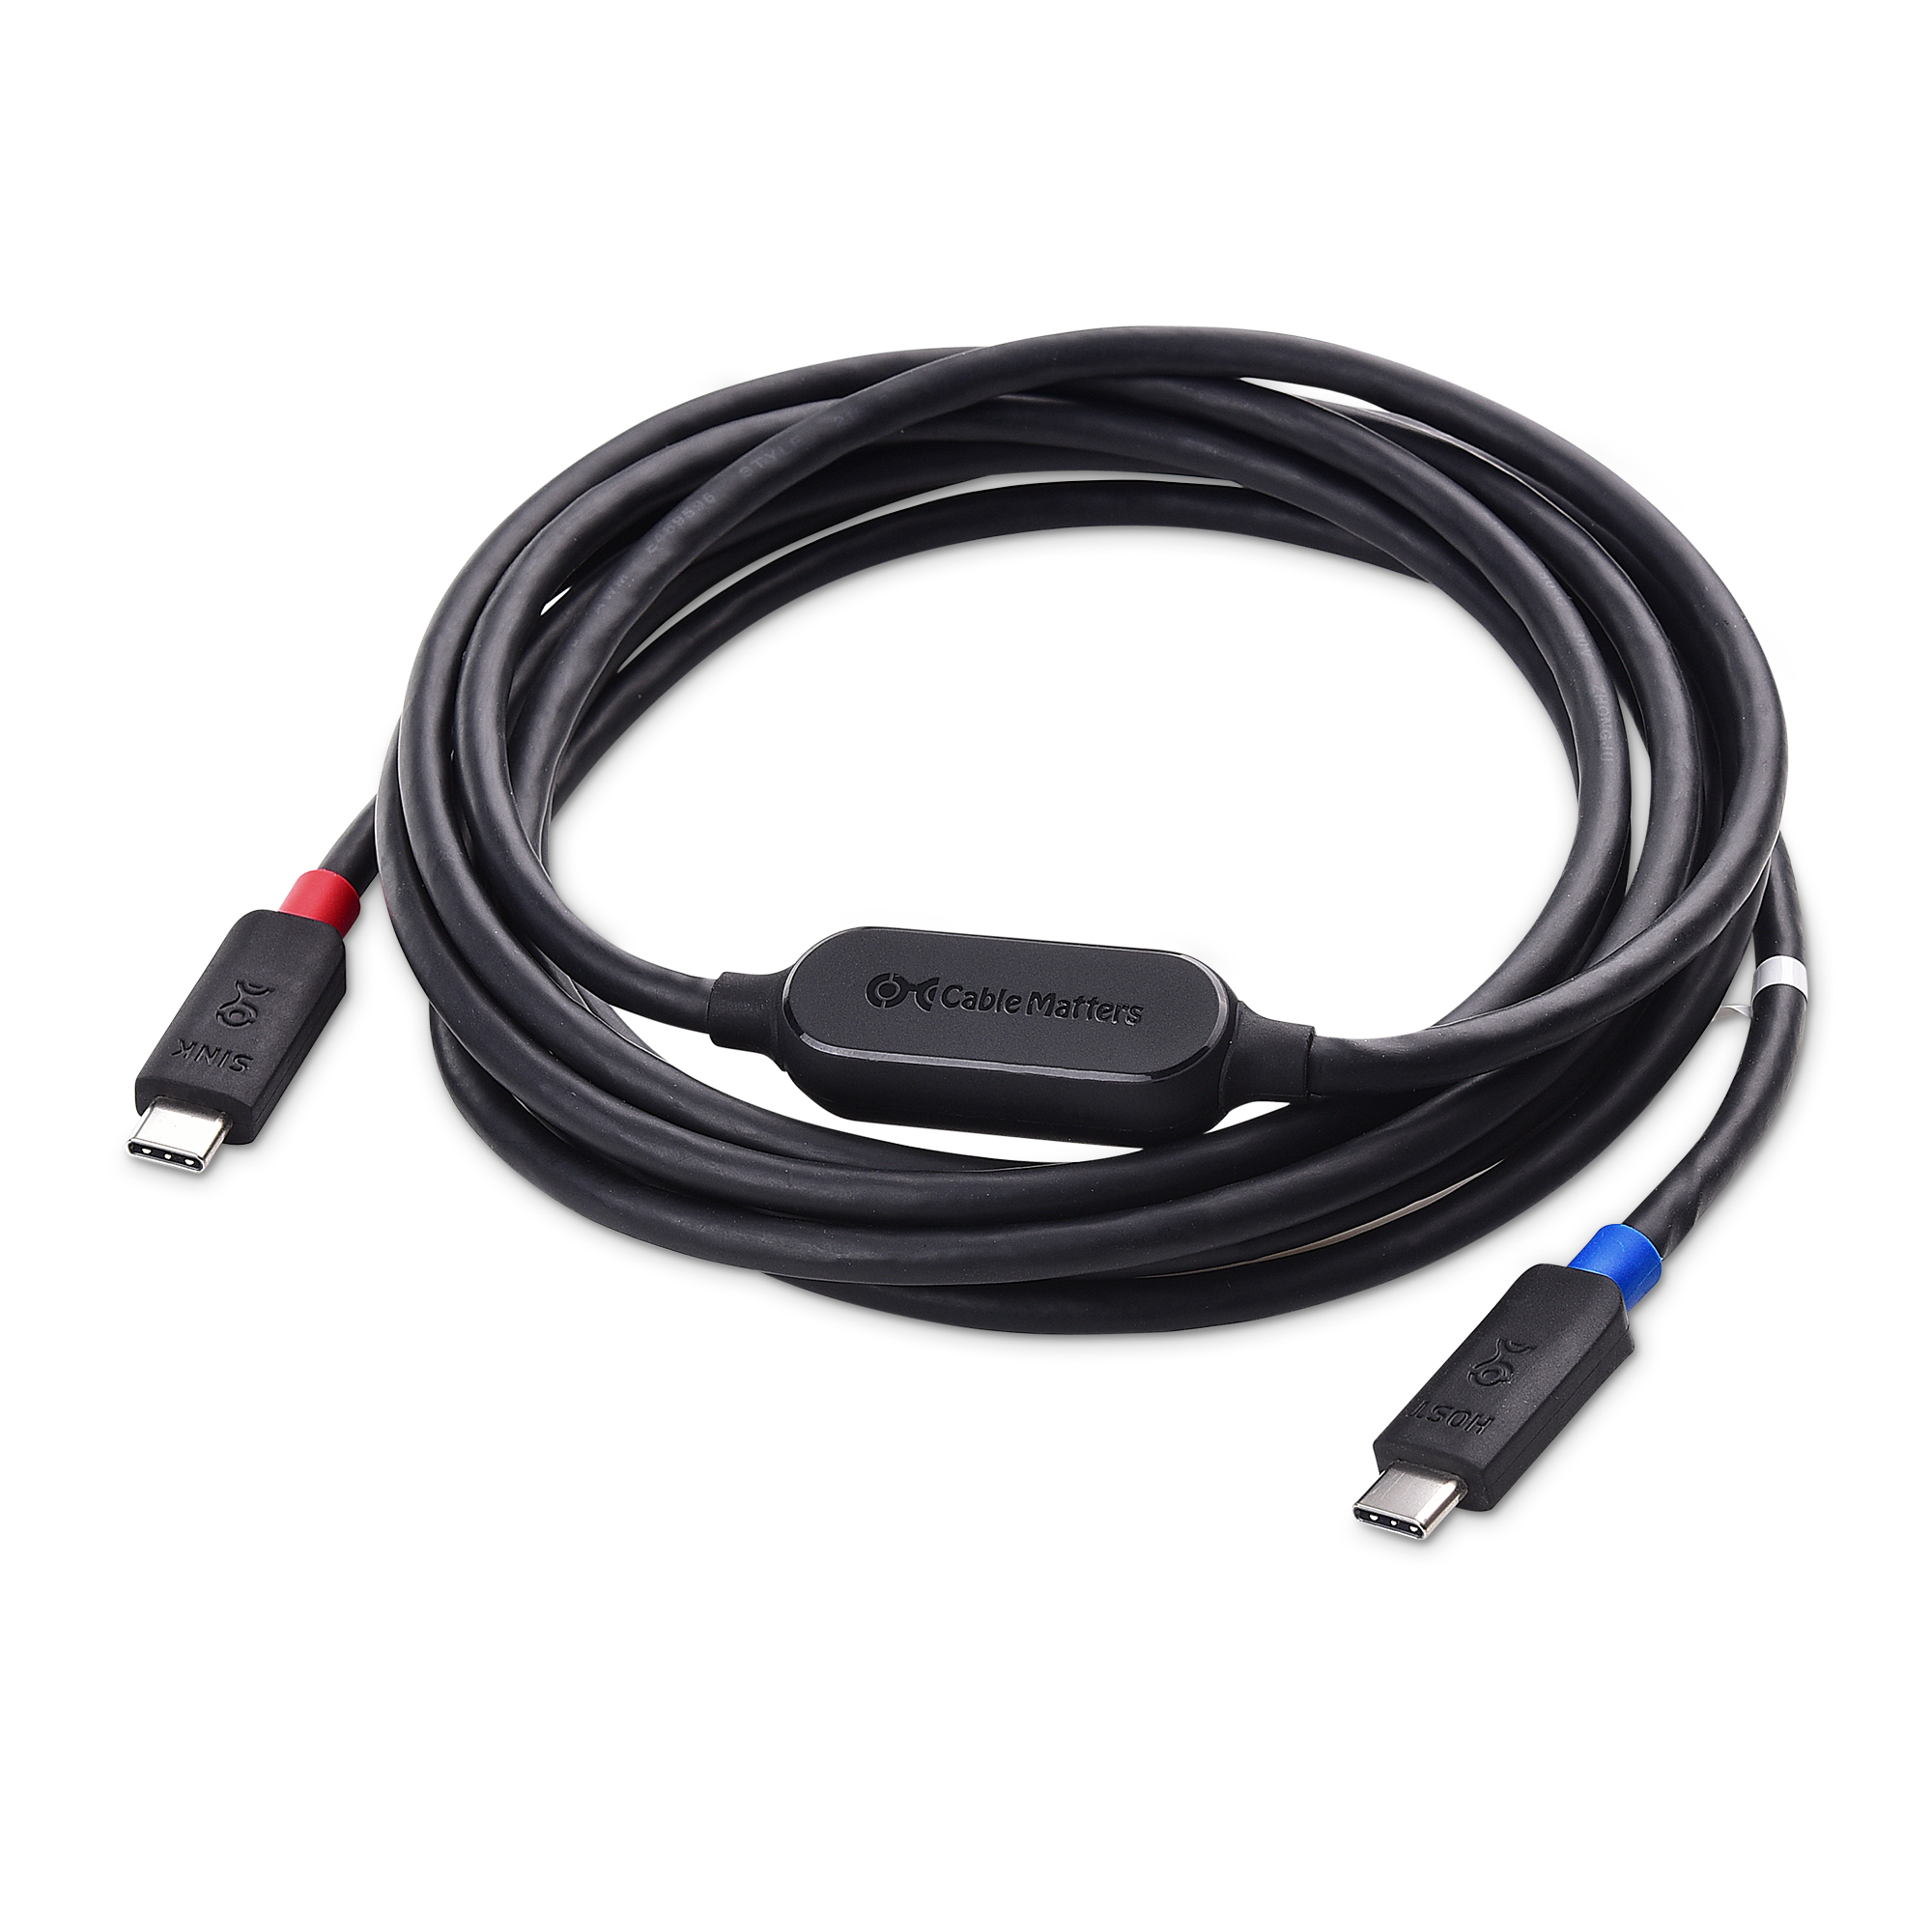 How Long can a USB-C cable be?